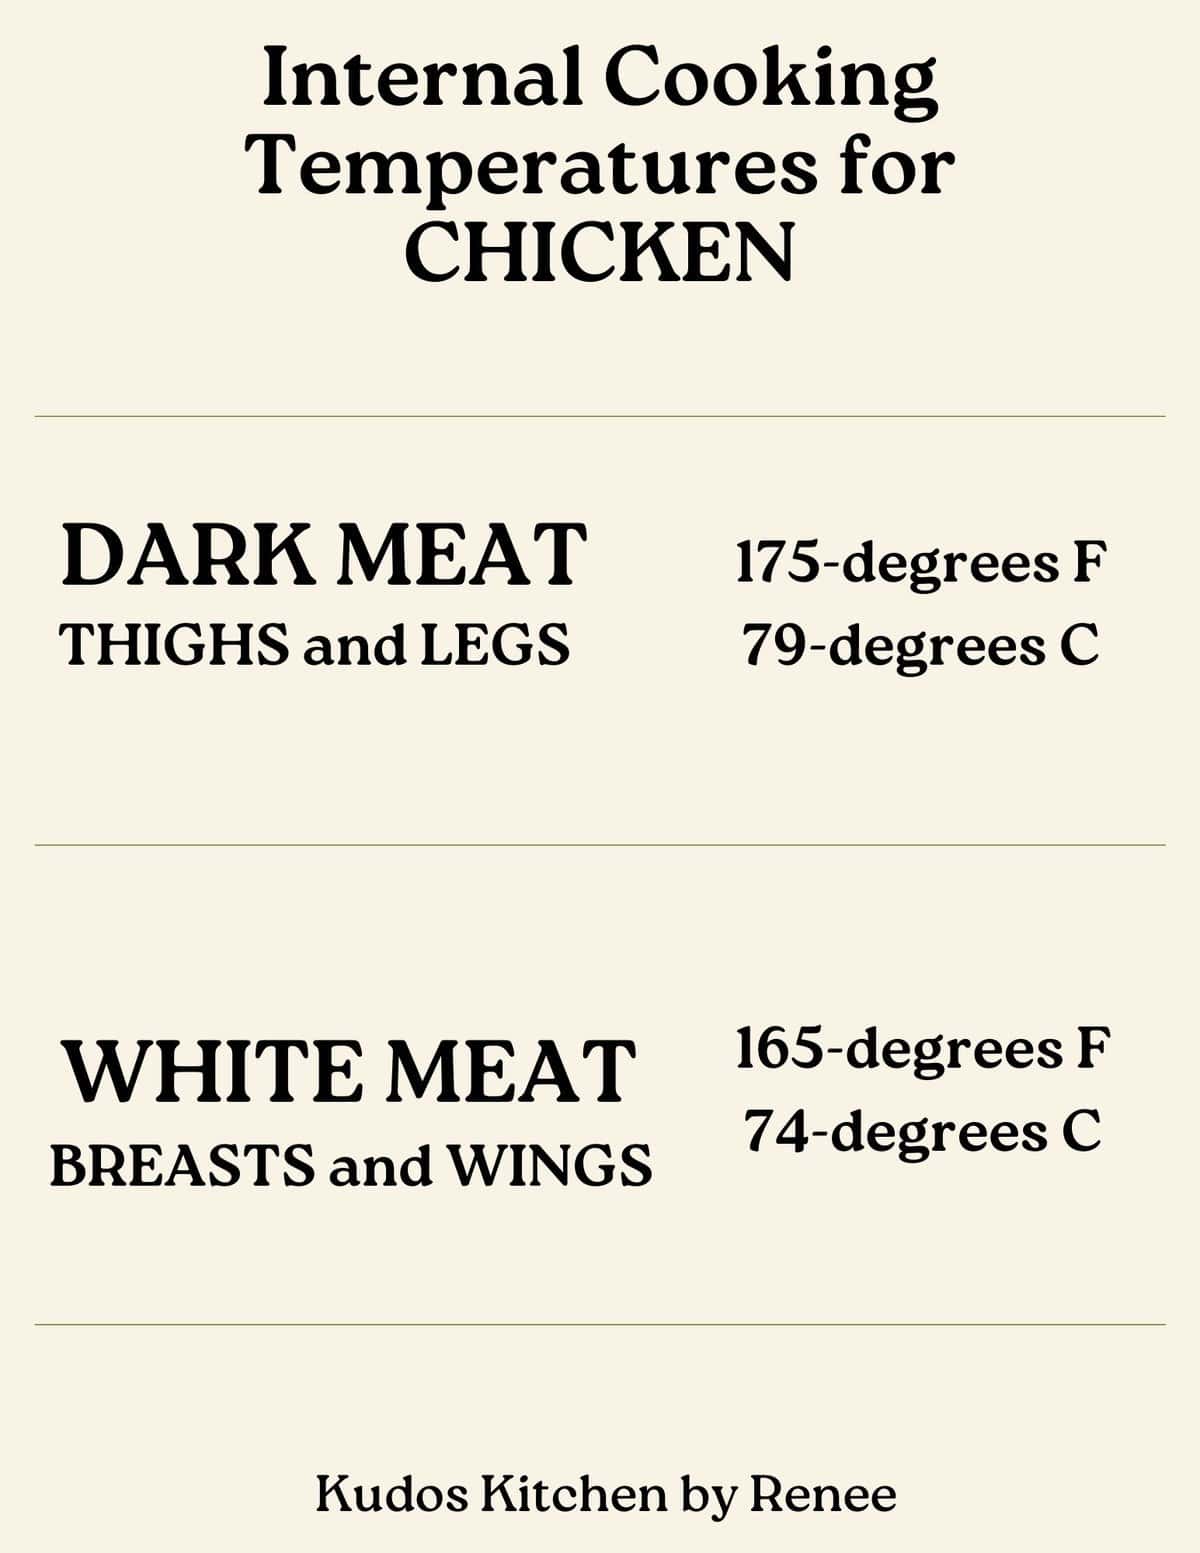 A chart with the proper internal temperature for cooking chicken.